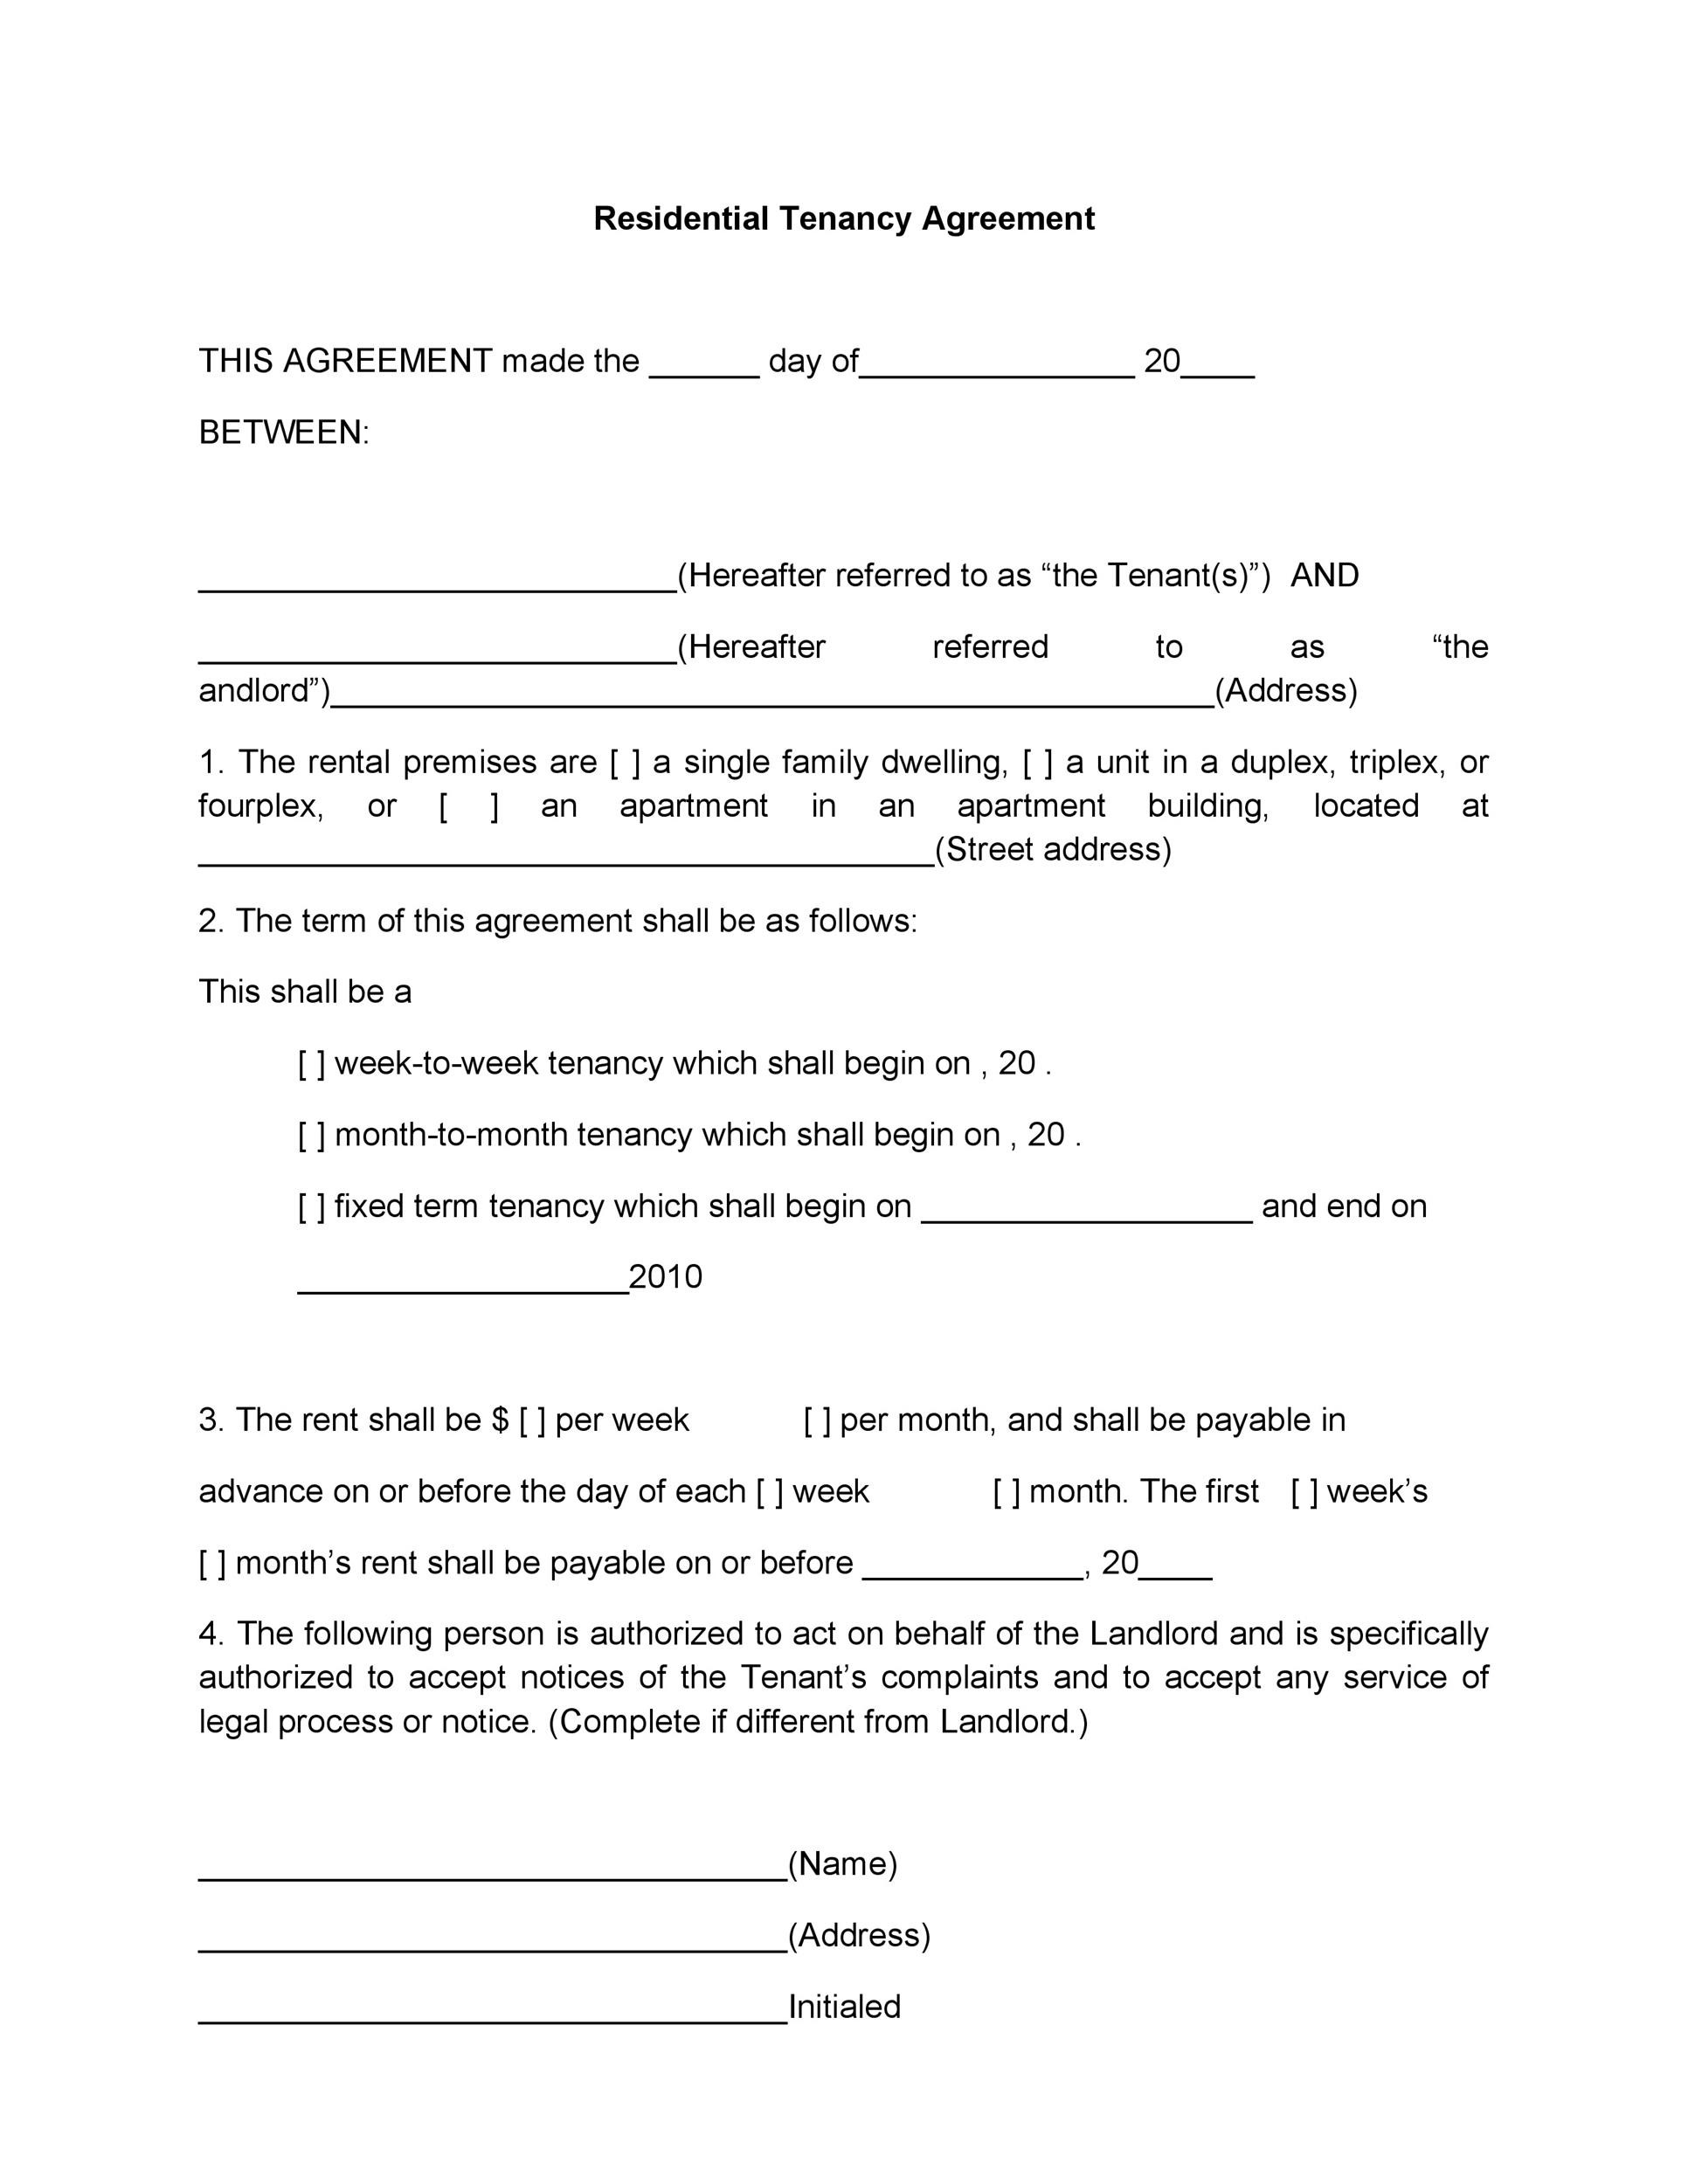 application form for tenancy agreement